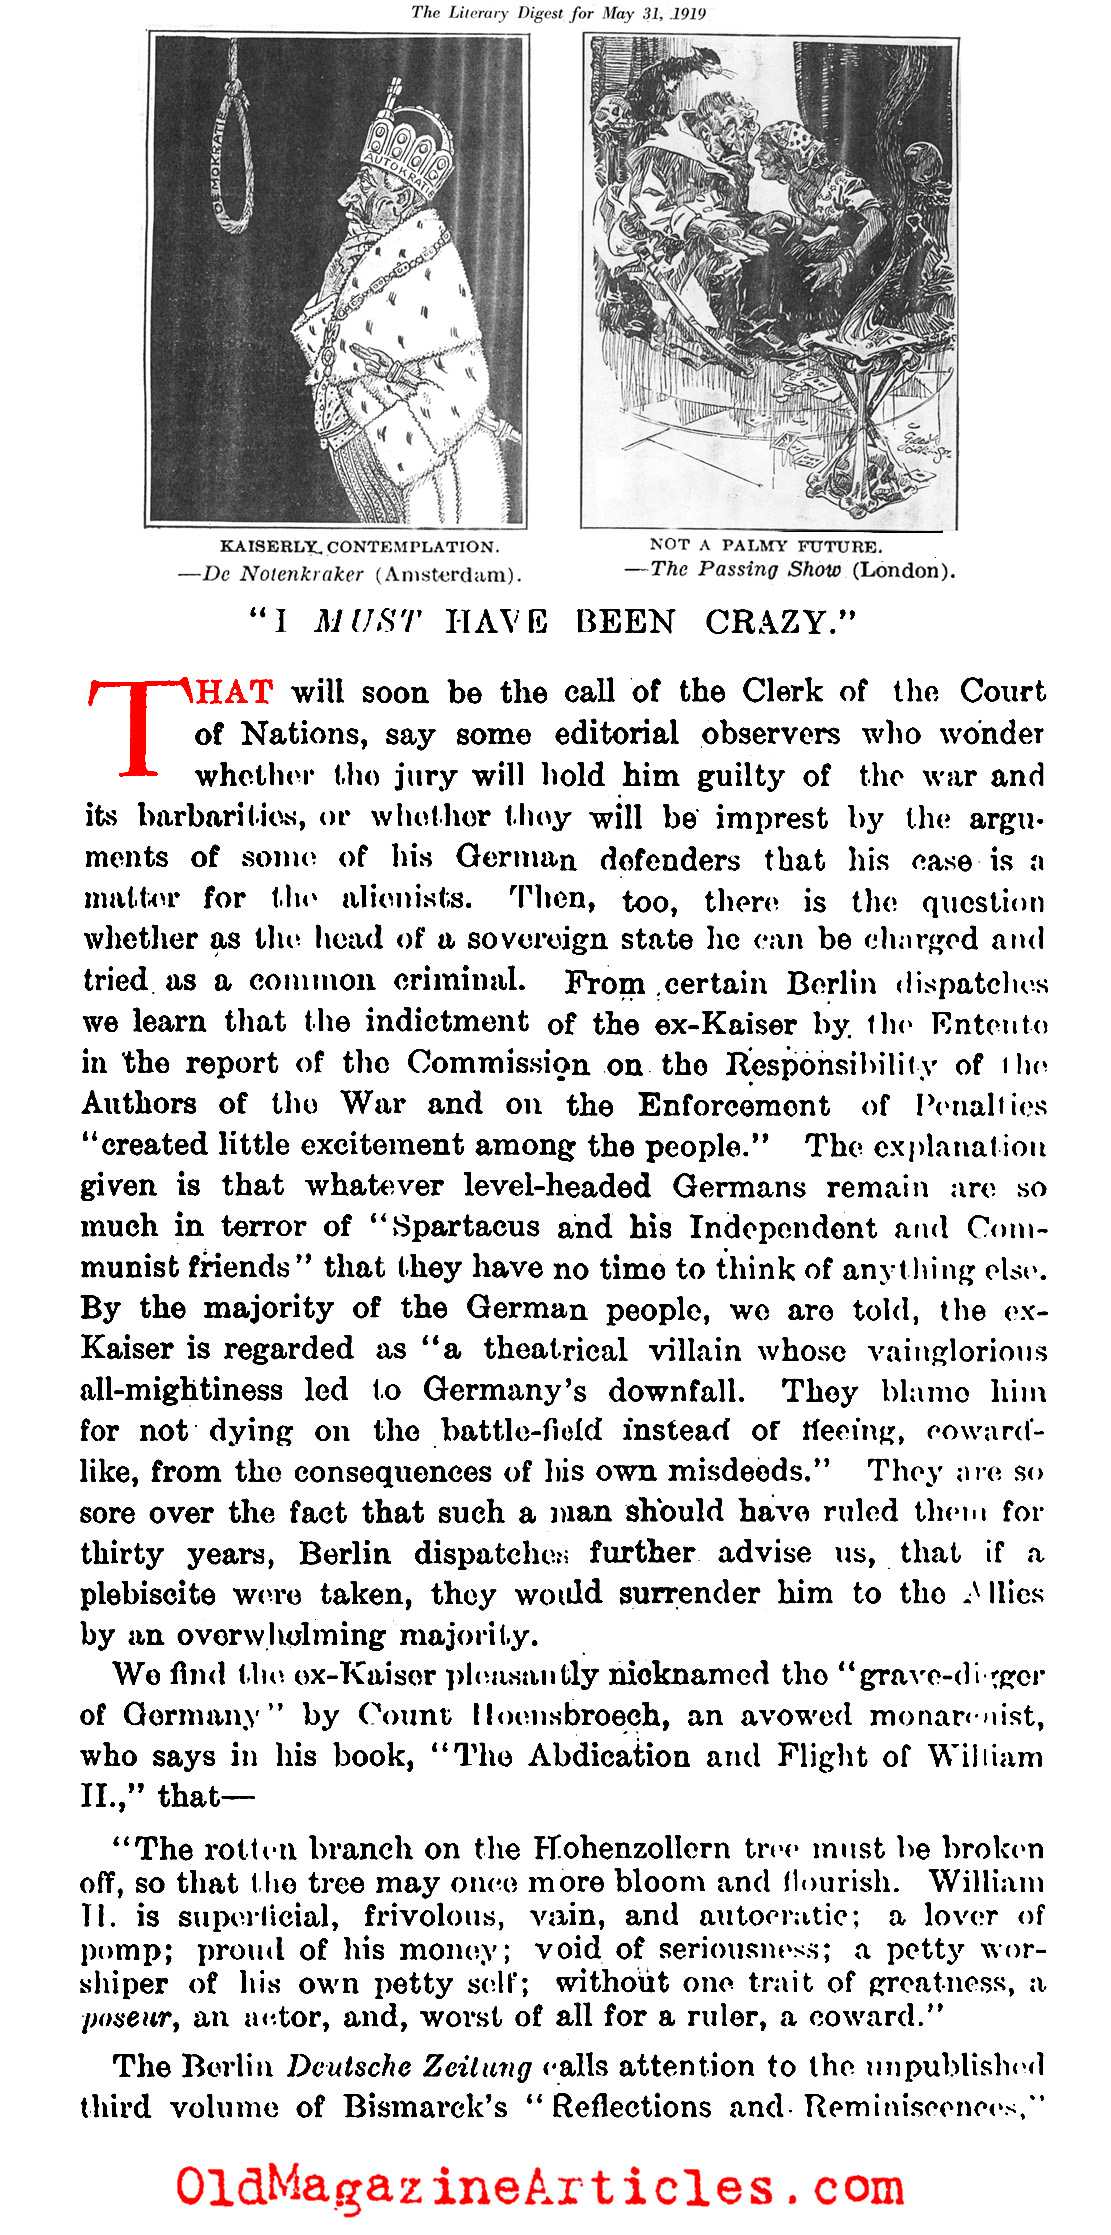 The Kaiser Condemned (The Literary Digest, 1919)